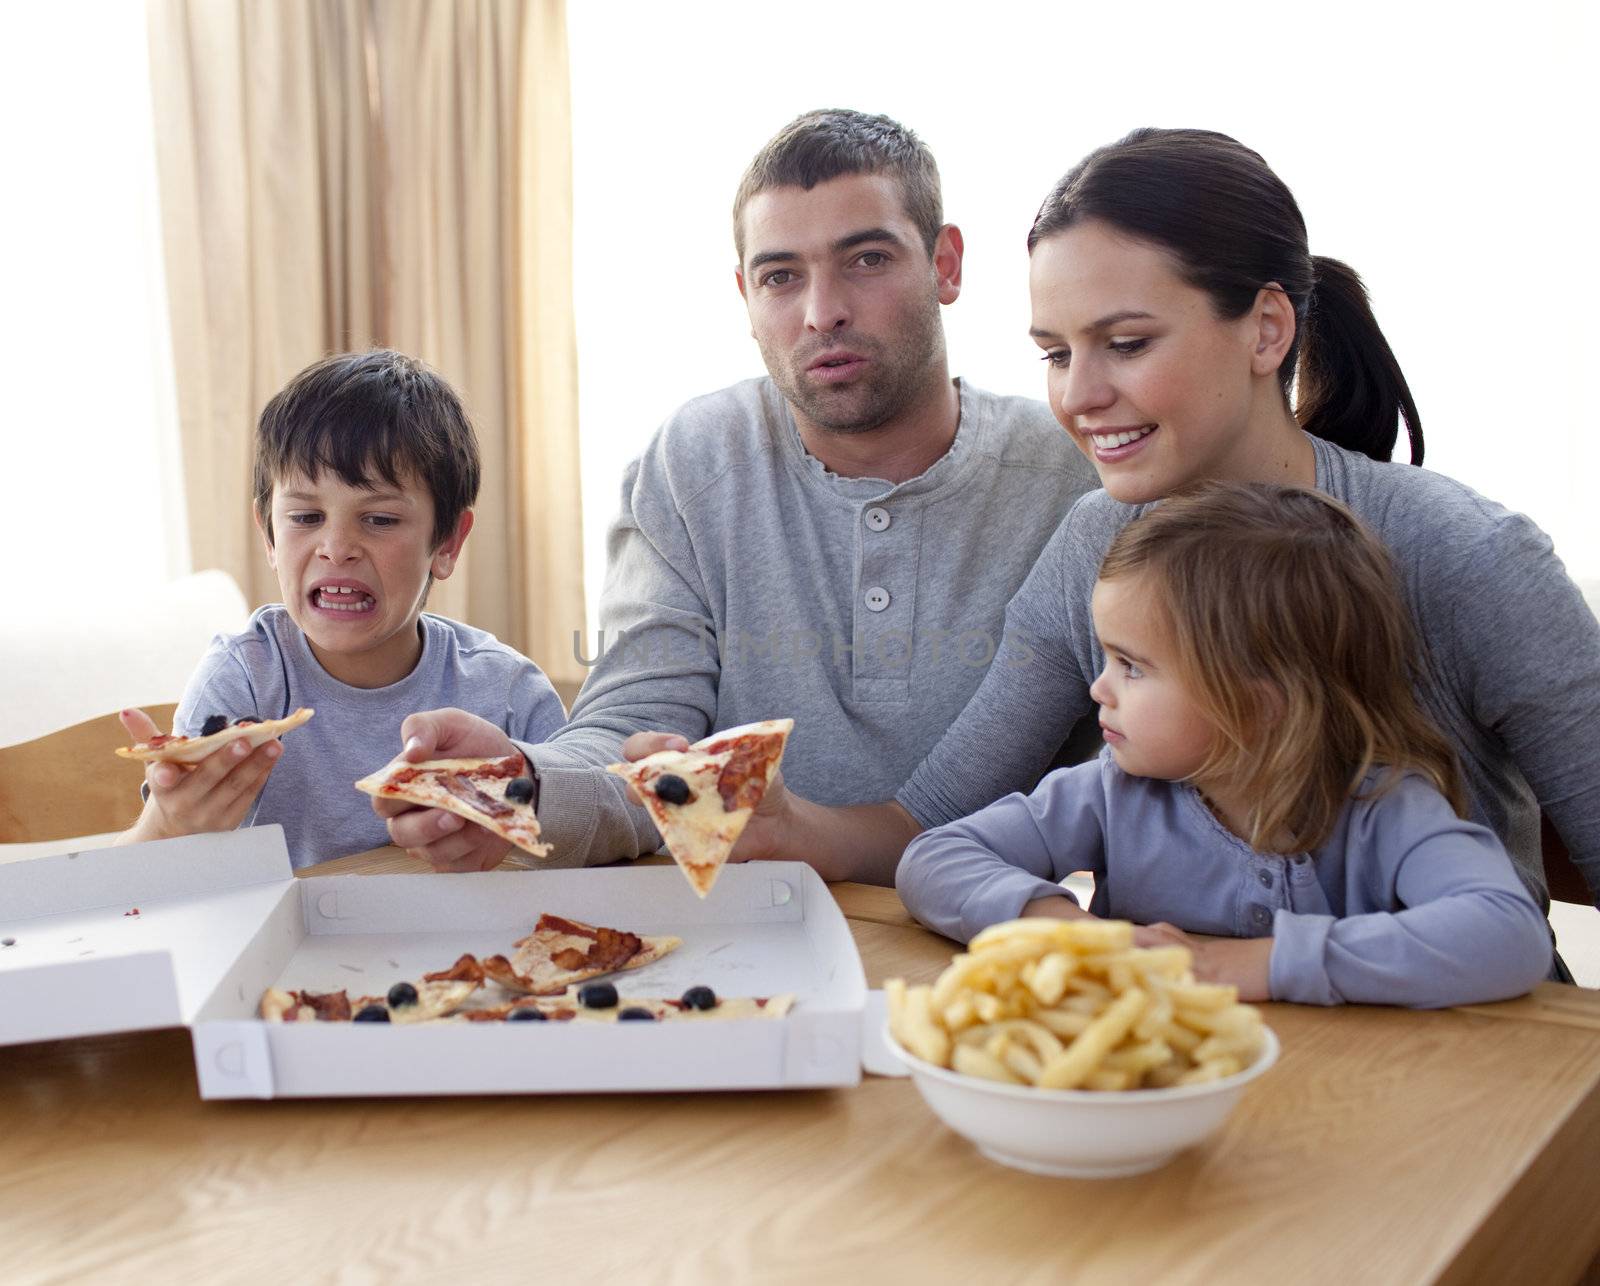 Parents and children eating pizza and fries on a sofa by Wavebreakmedia